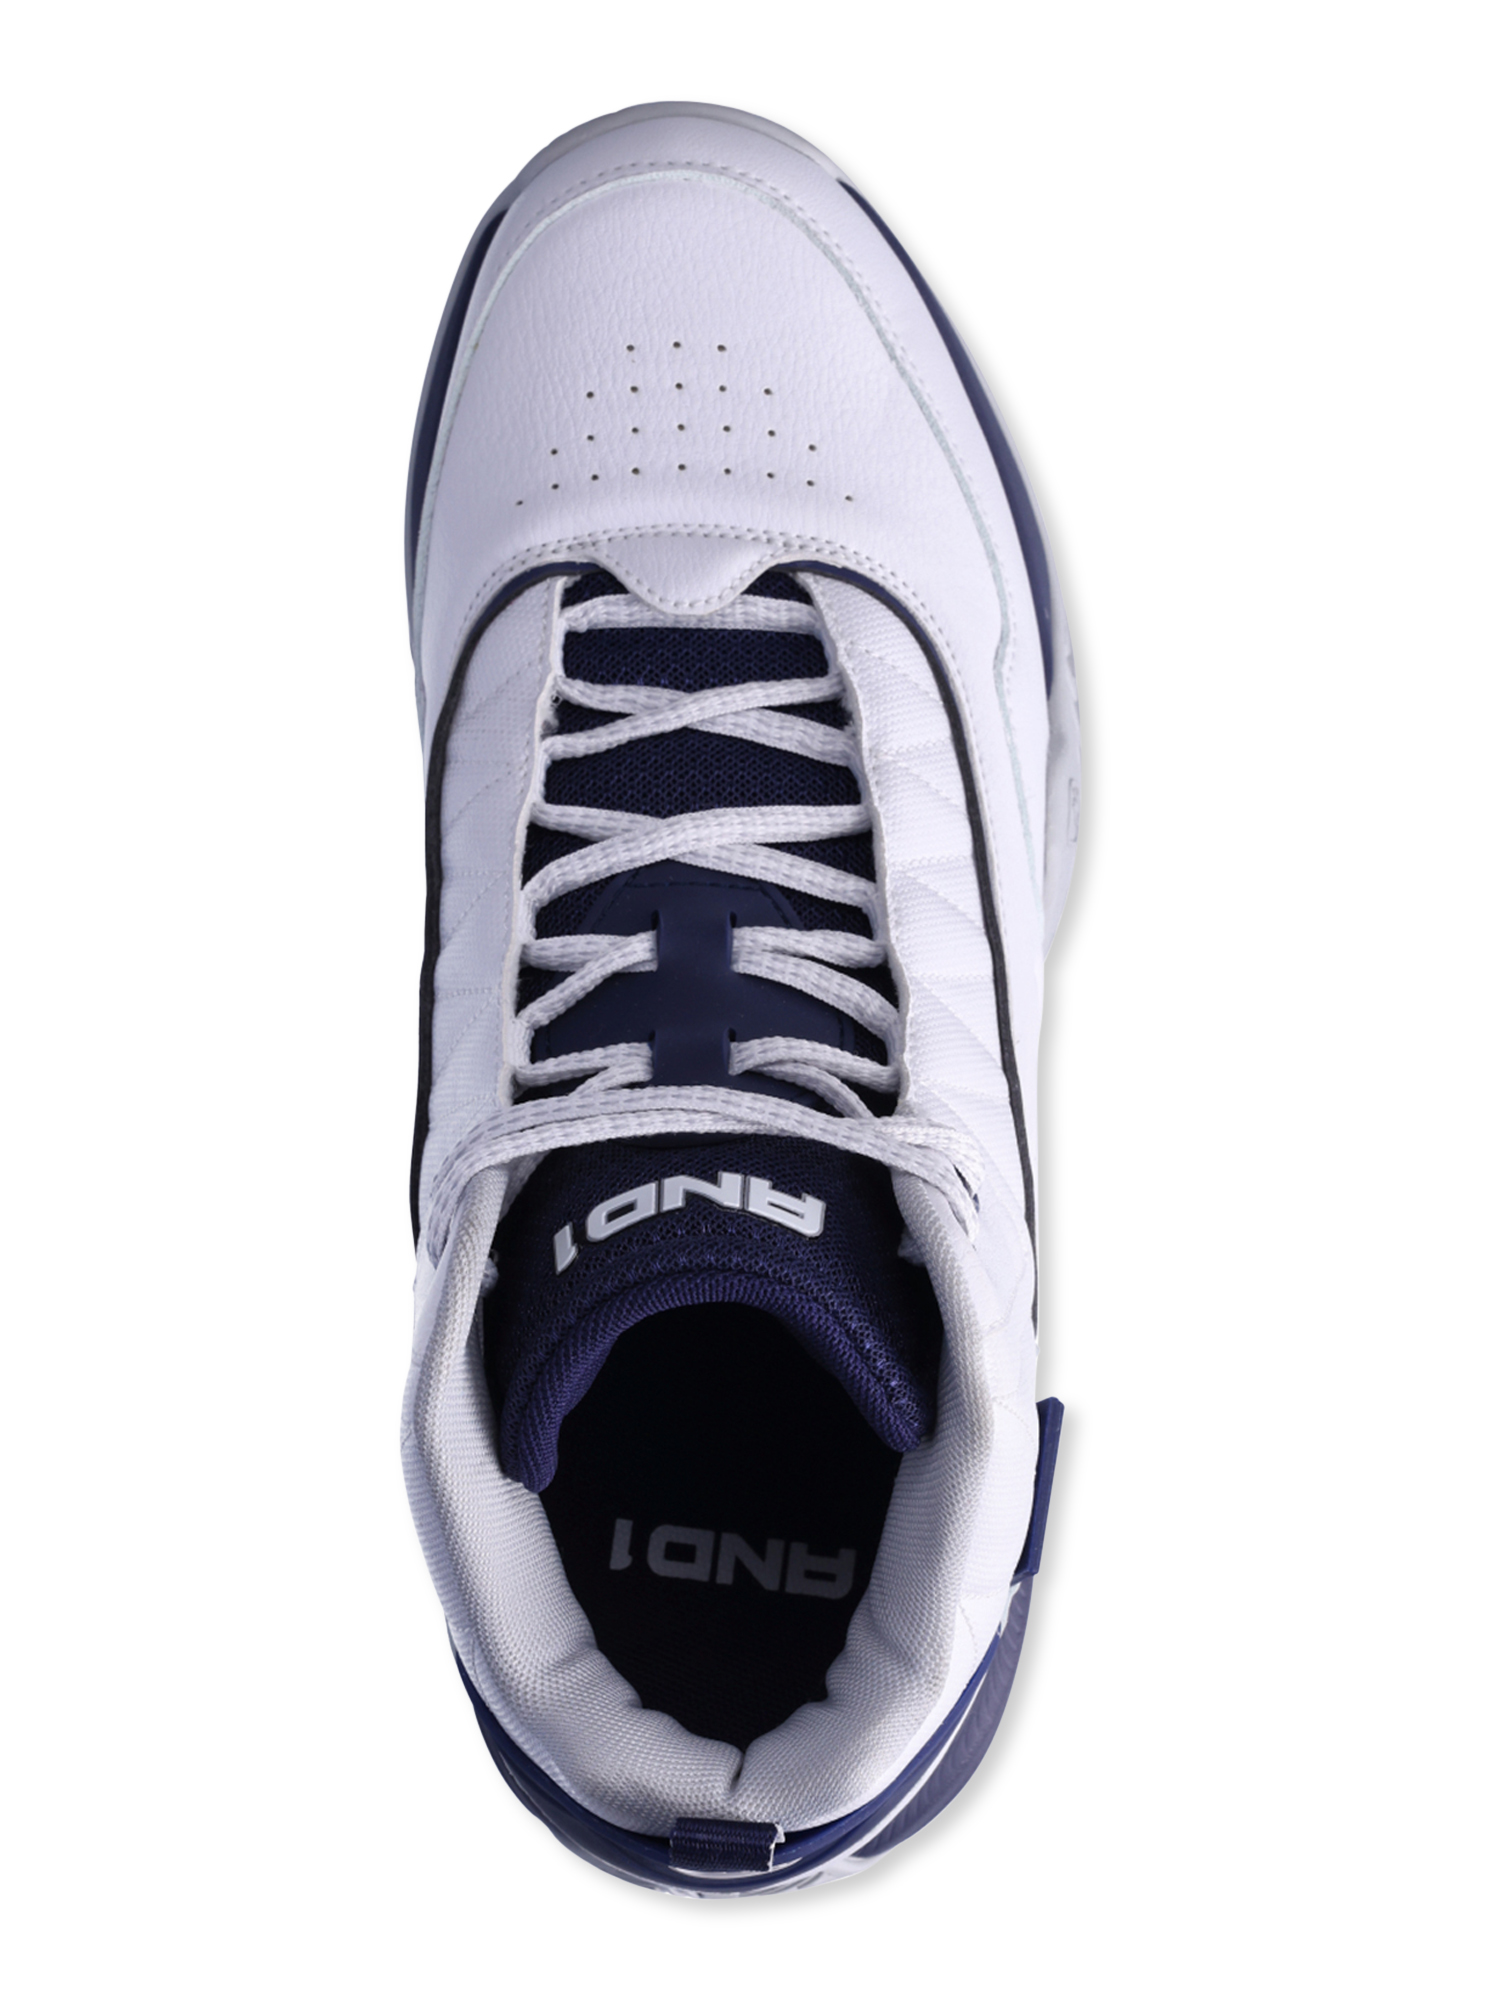 AND1 Men’s Streetball Basketball High-Top Sneakers - image 4 of 6